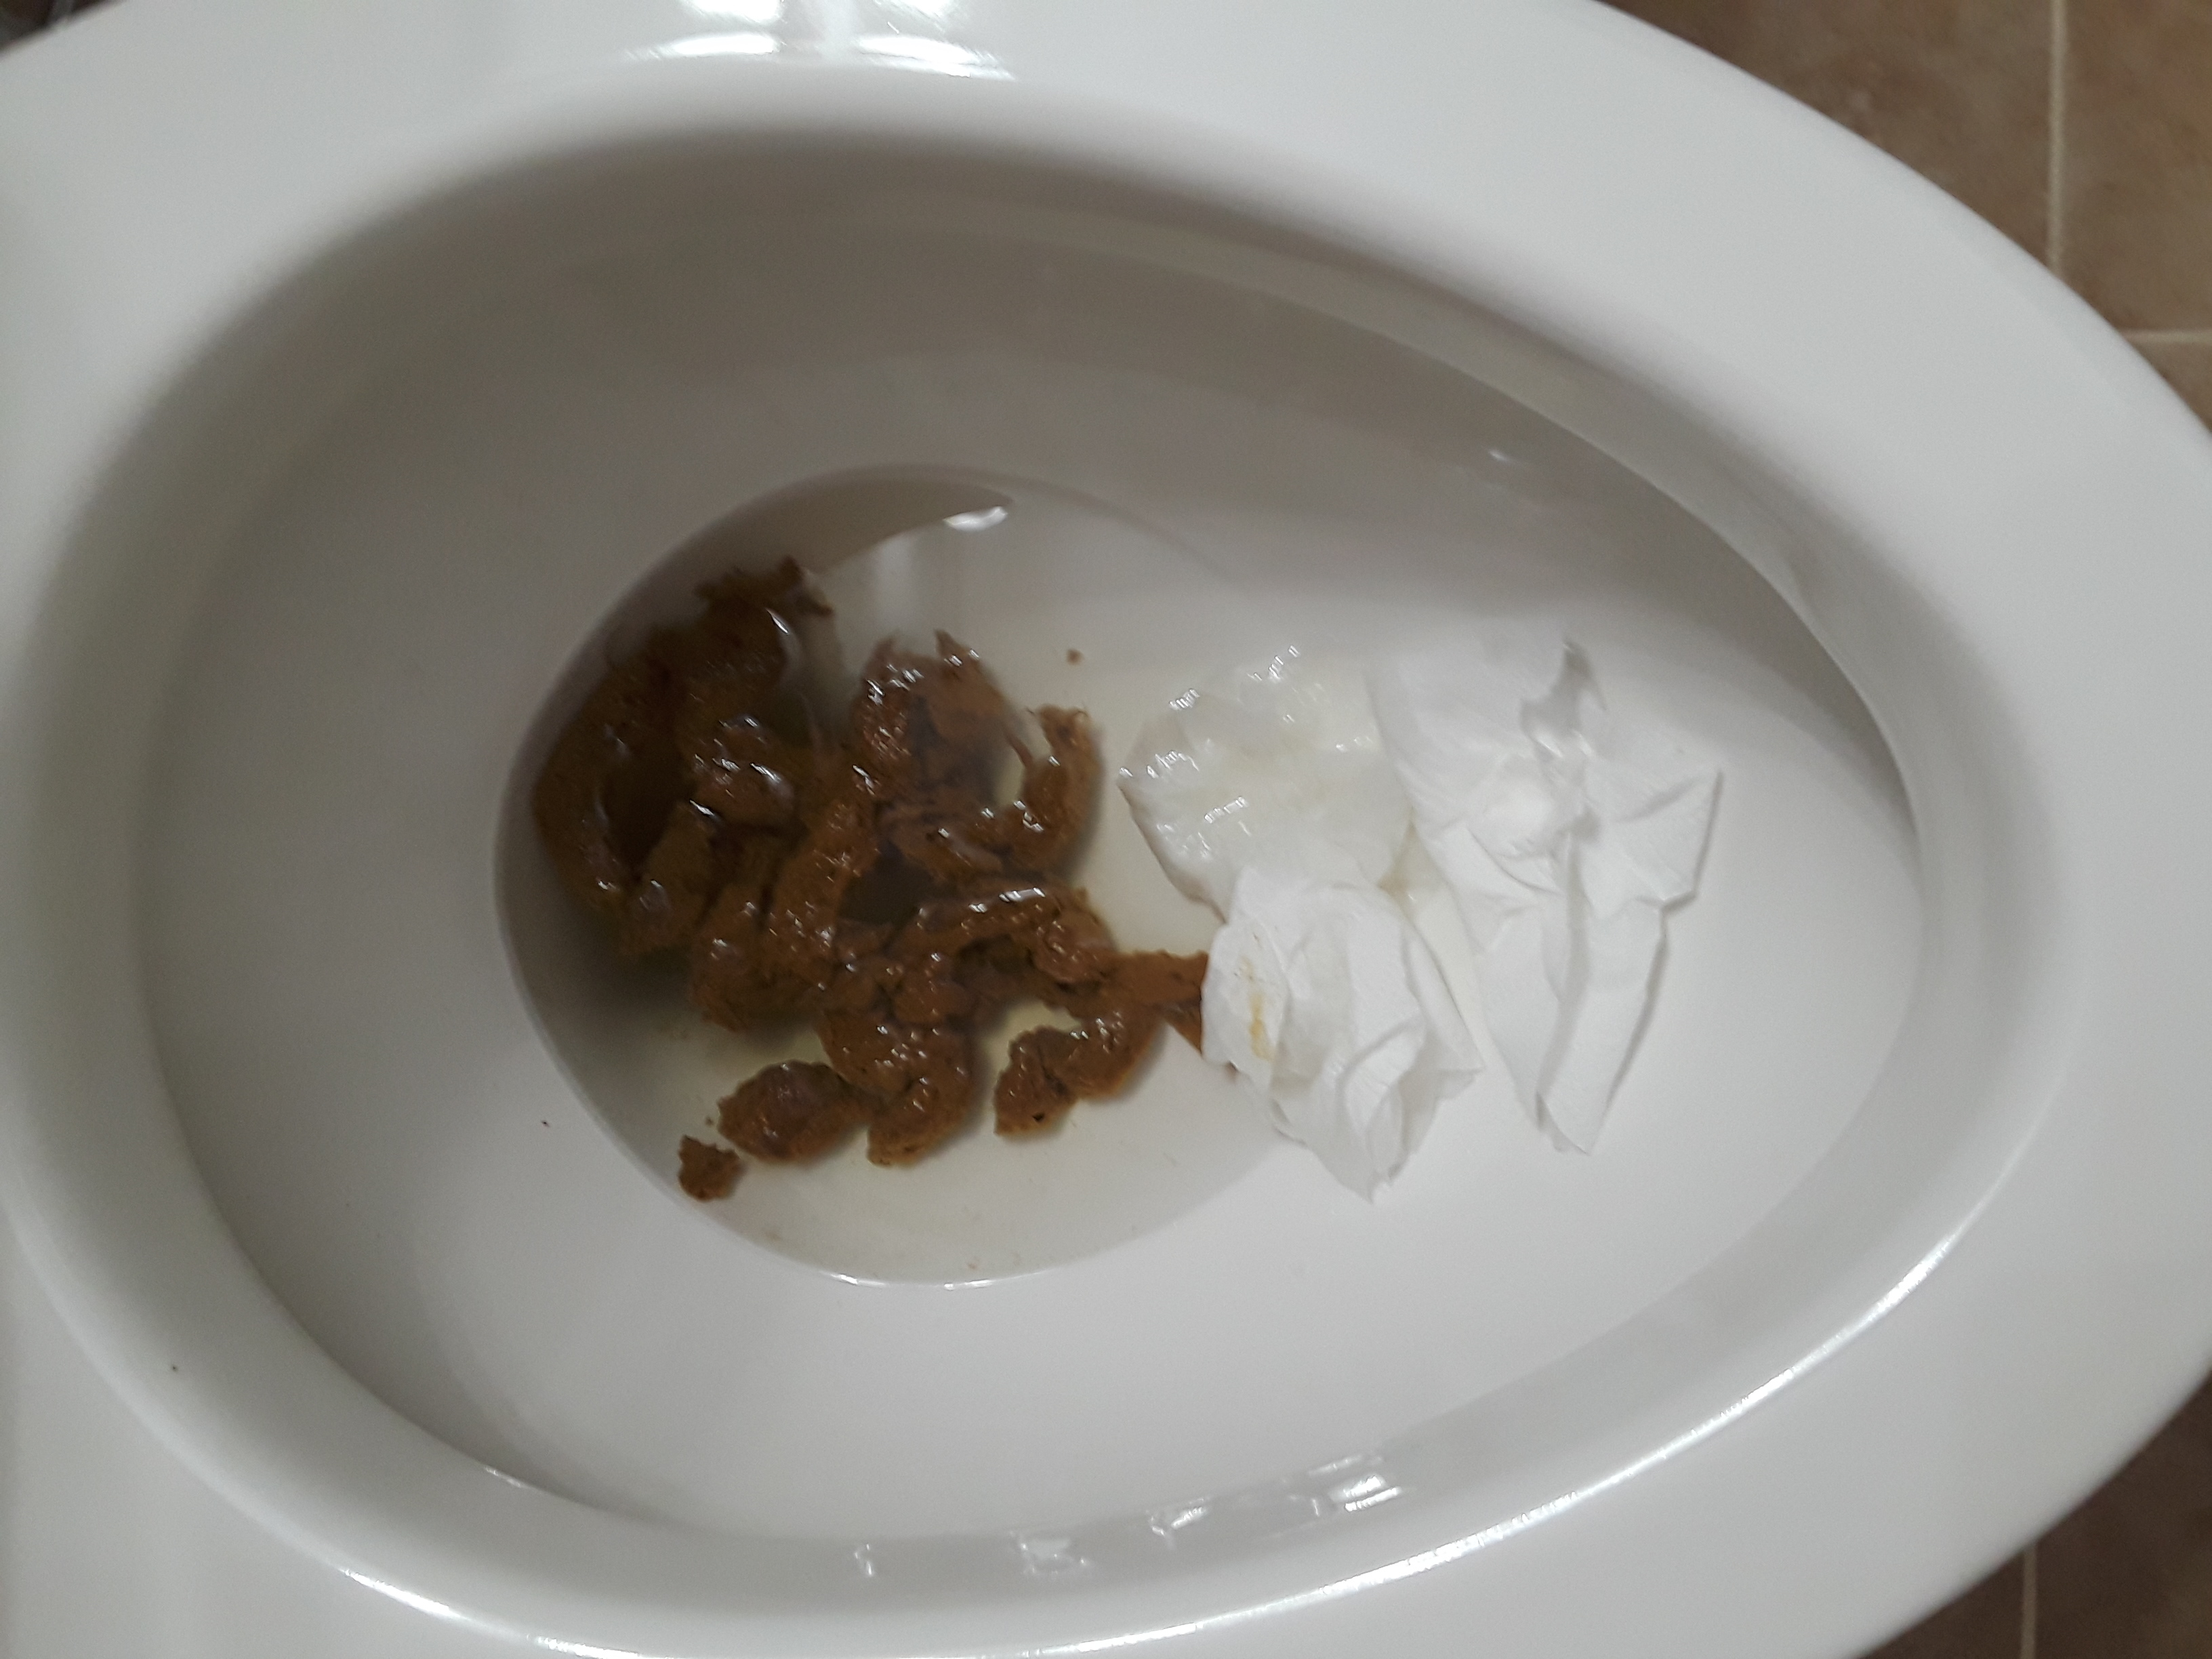 11-24-18 Greasy shit and close up piss